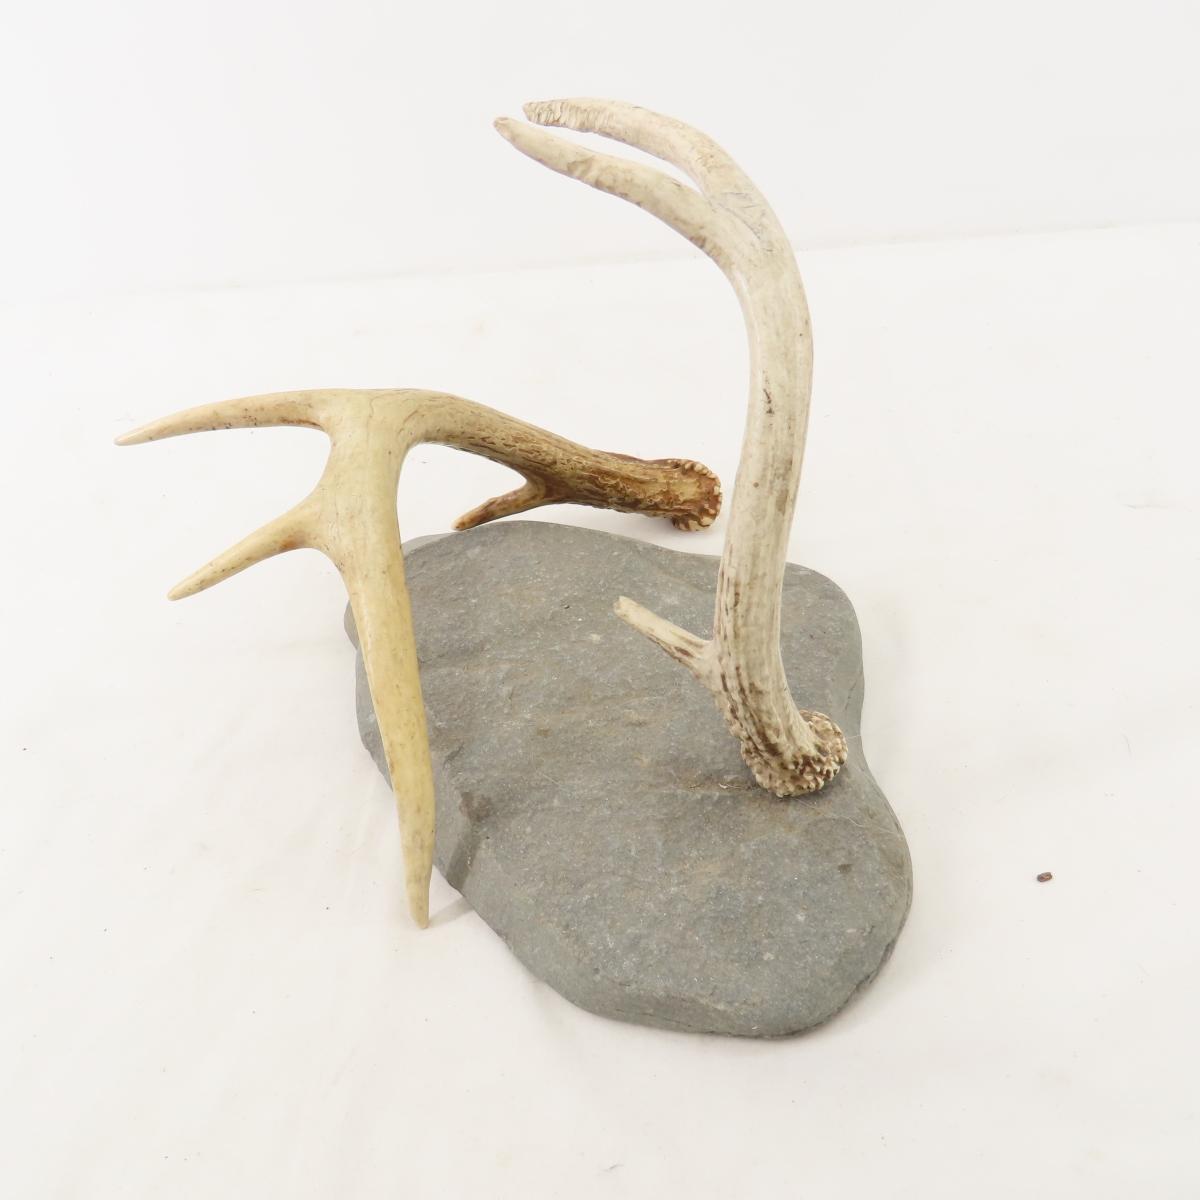 Antlers and mounts with feather